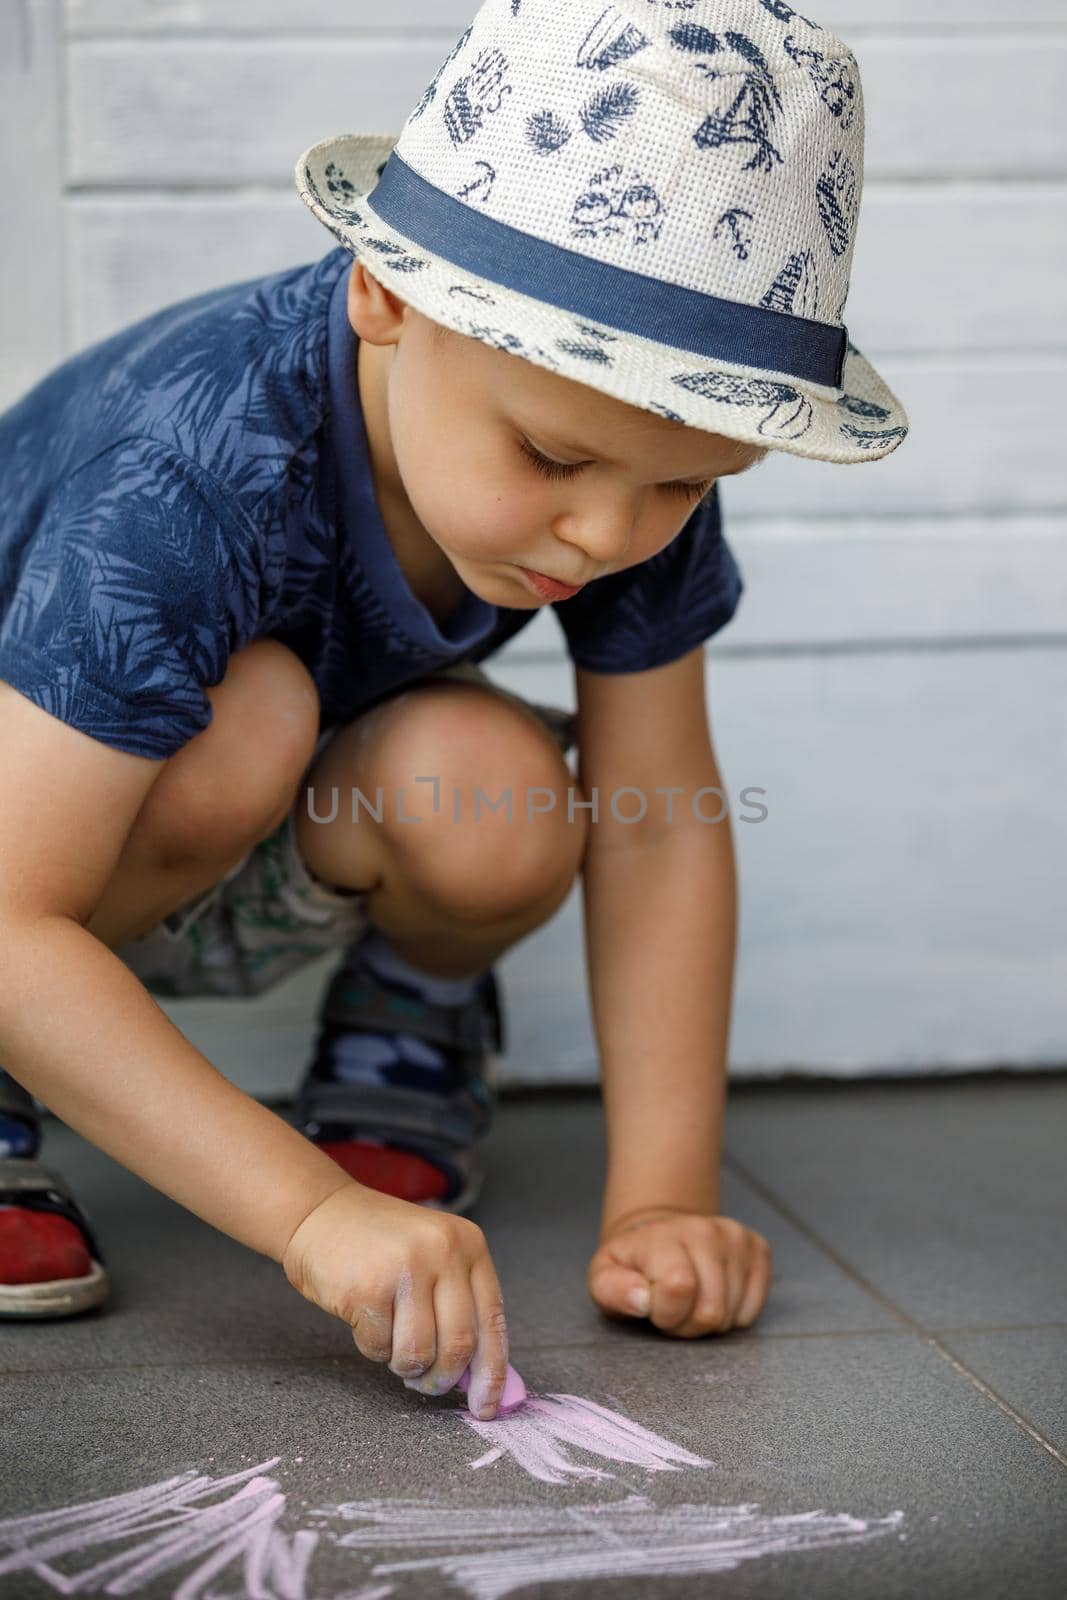 A boy draws with crayons on the asphalt . Painting. Summer games on the street. Childrens entertainment and leisure. Child puts a lot of effort and learns.